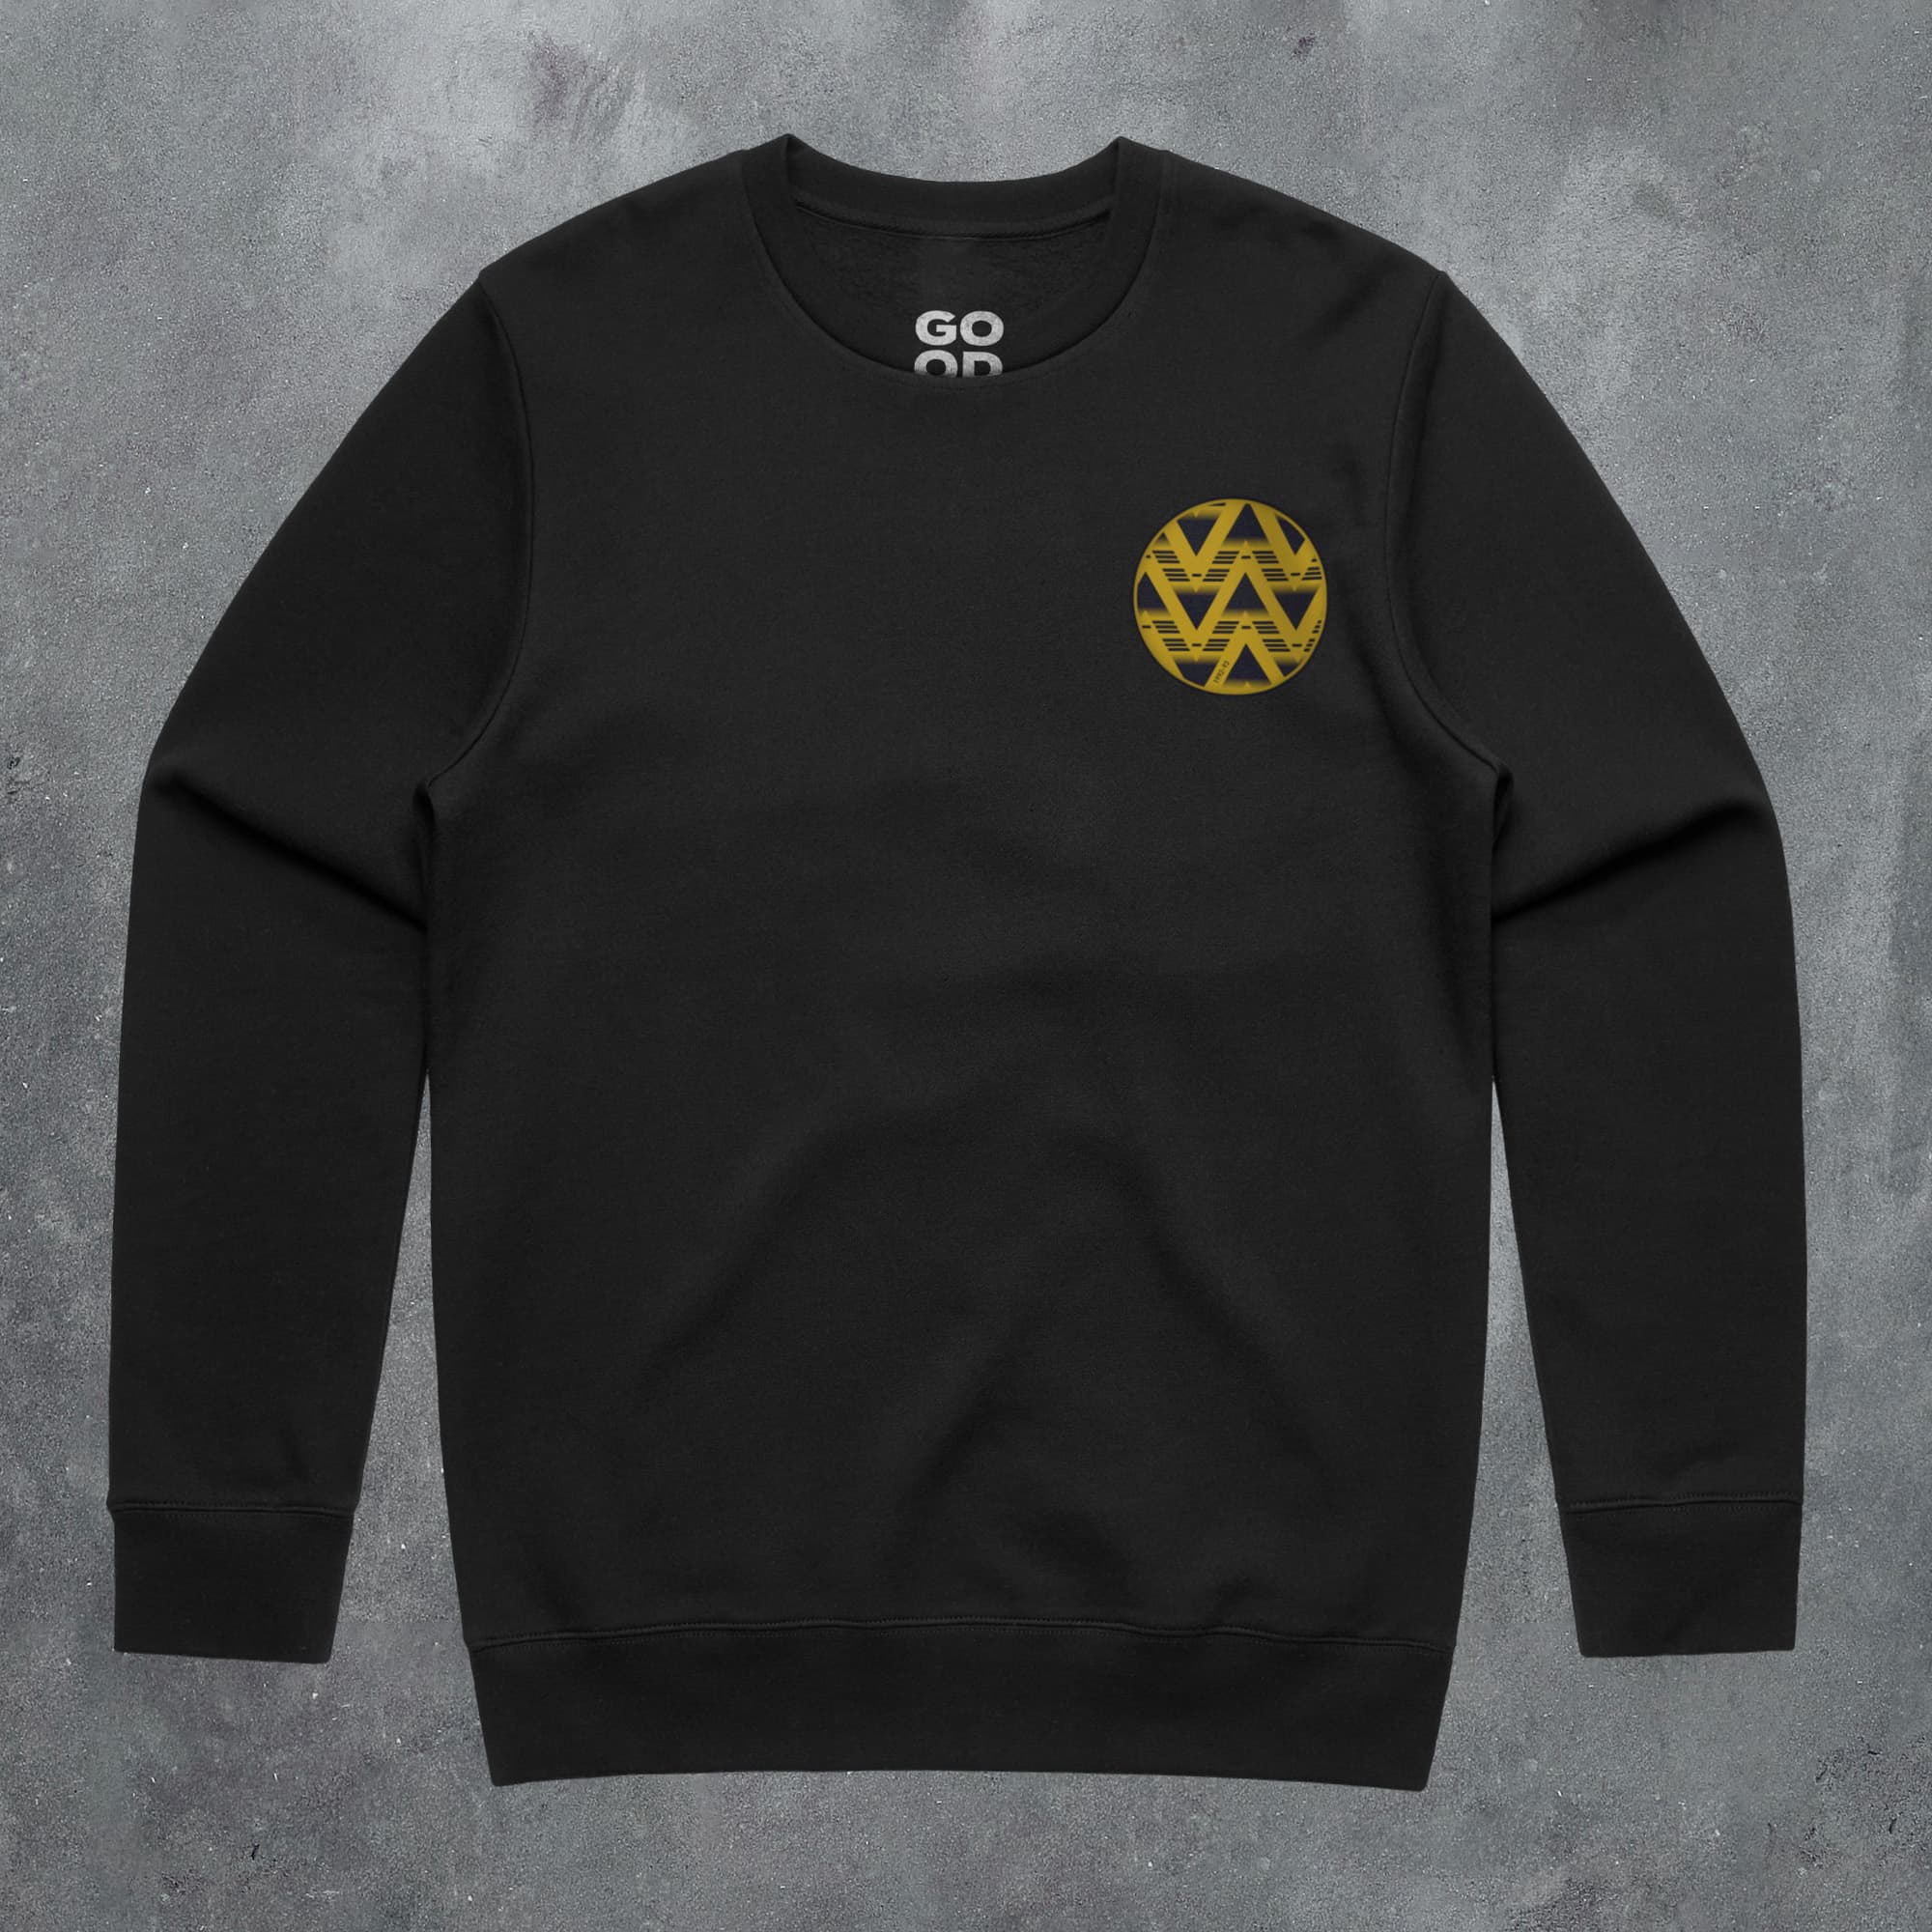 a black sweatshirt with a yellow logo on it